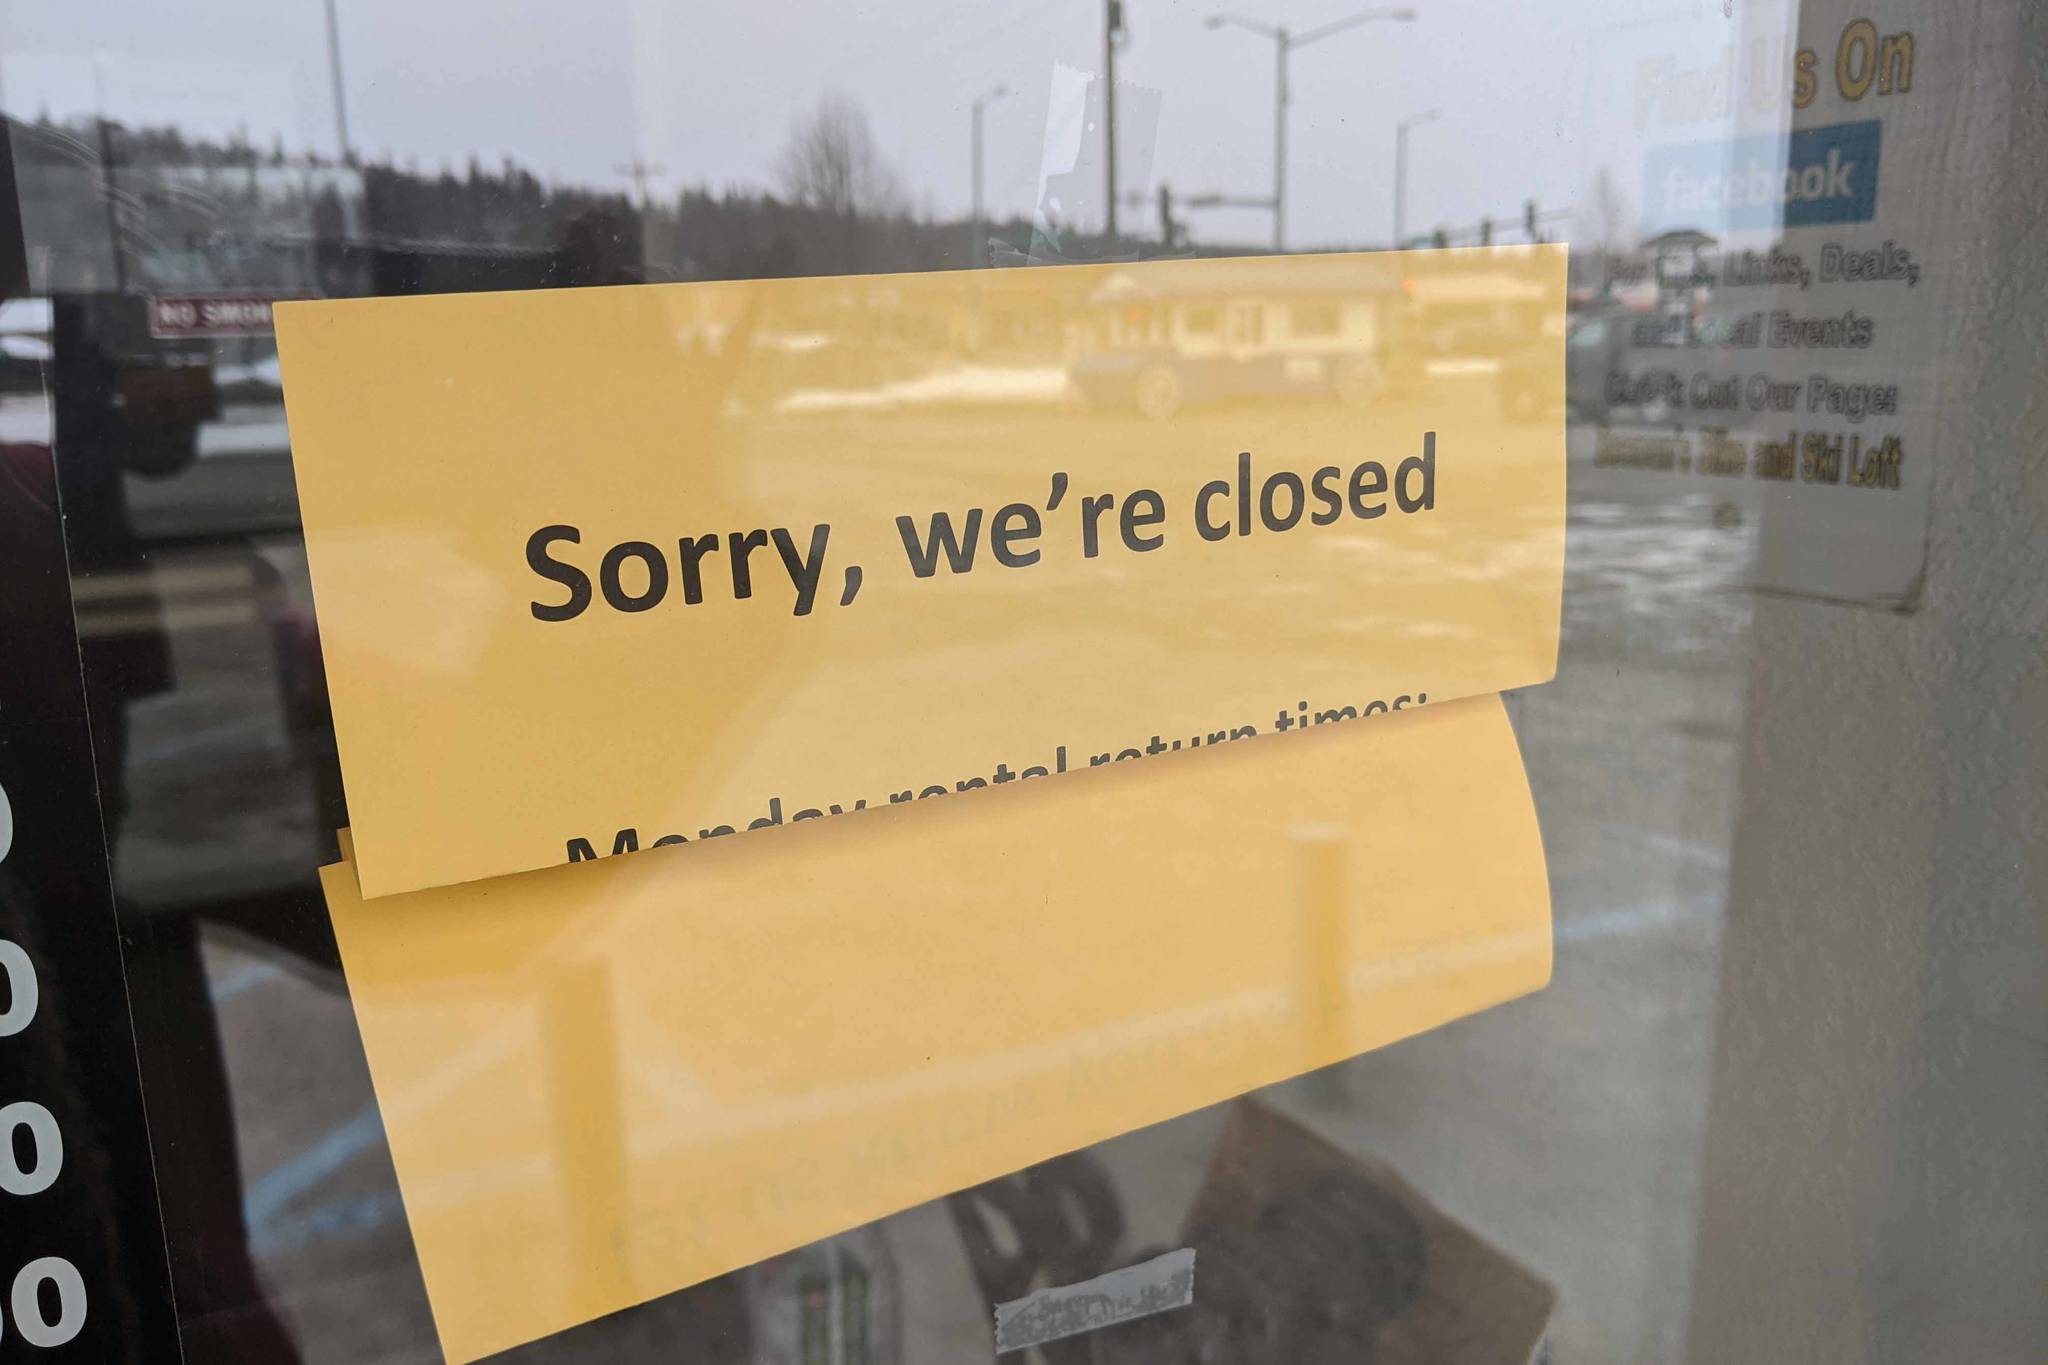 A closed sign is posted at a retail store shuttered due to the new coronavirus, in Soldotna, Alaska, on Wednesday, April 1, 2020. (Photo by Erin Thompson/Peninsula Clarion)